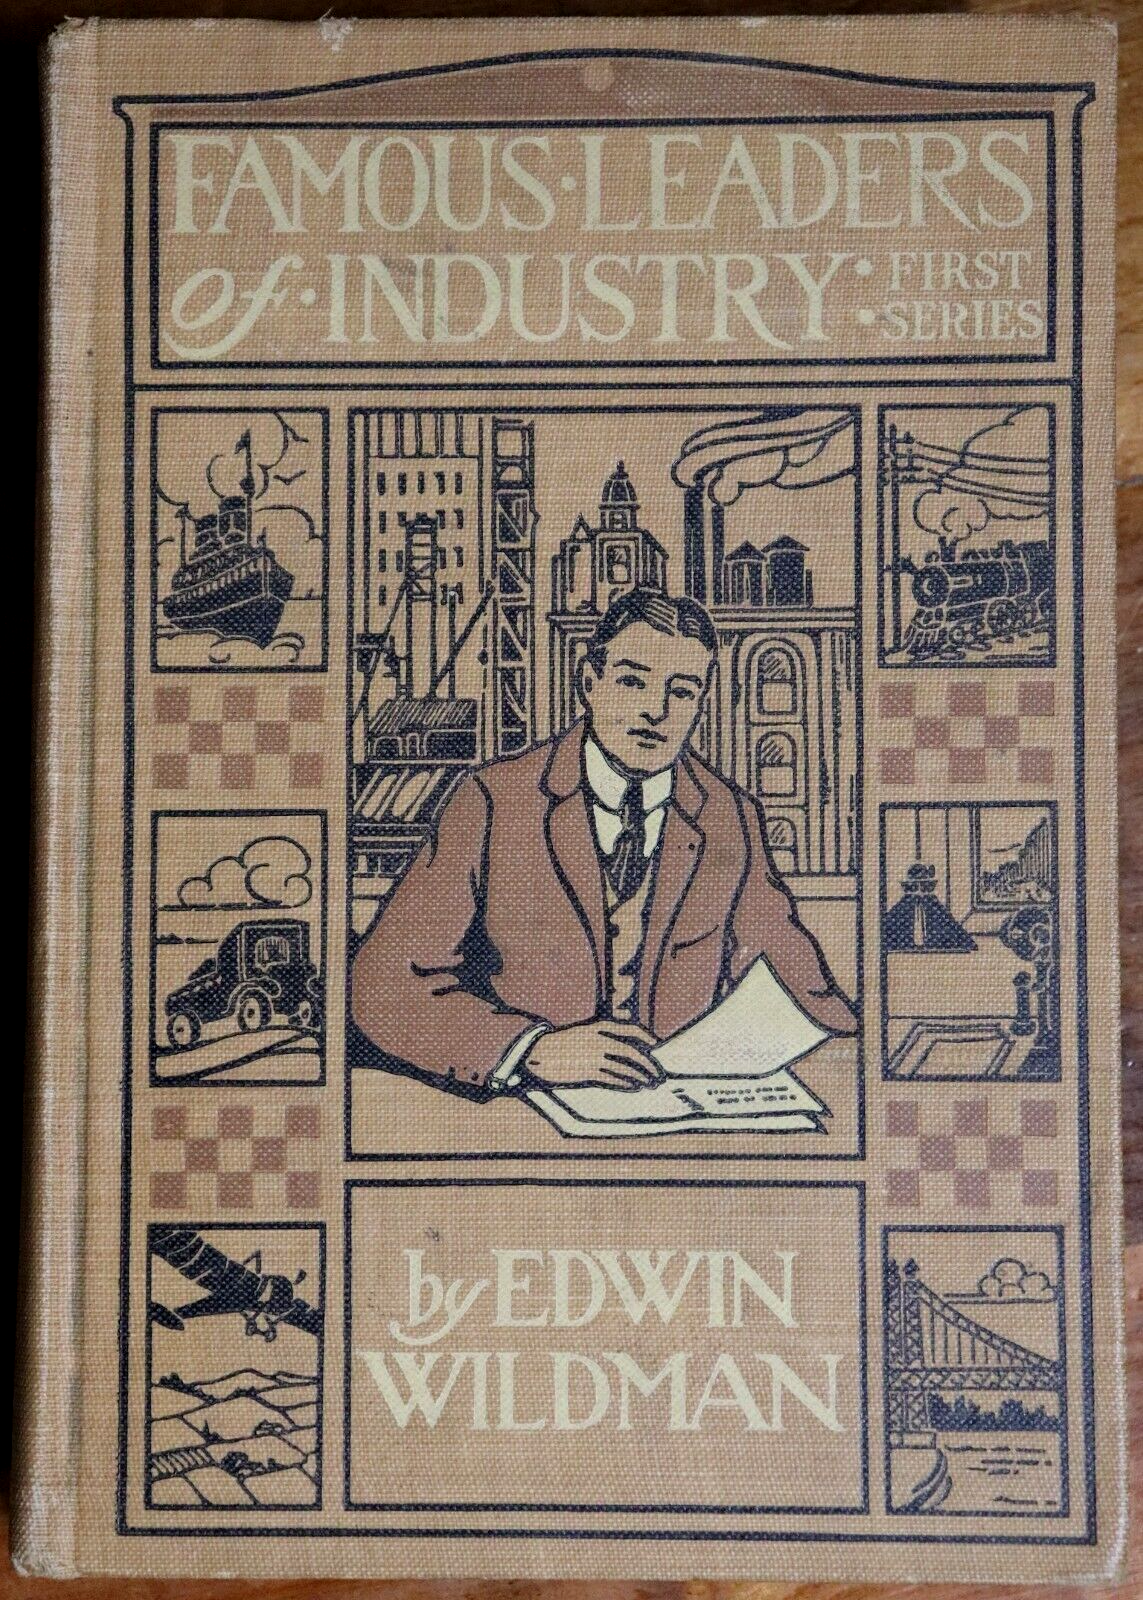 Famous Leaders Of Industry by Edwin Wildman - 1921 - Industrial History Book